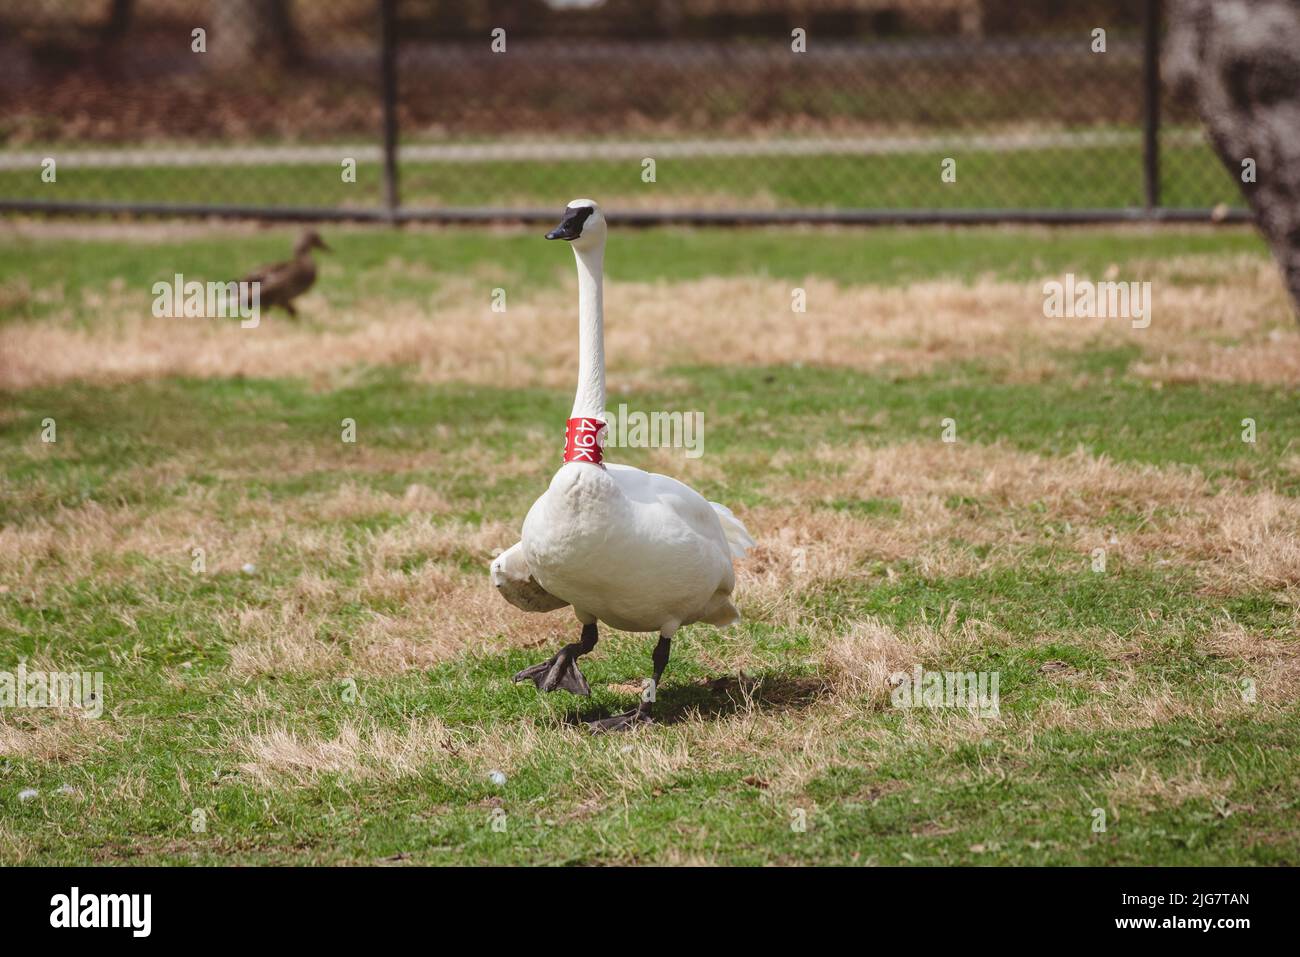 A closeup of a Trumpeter Swan with a red neck band walking on the grass Stock Photo